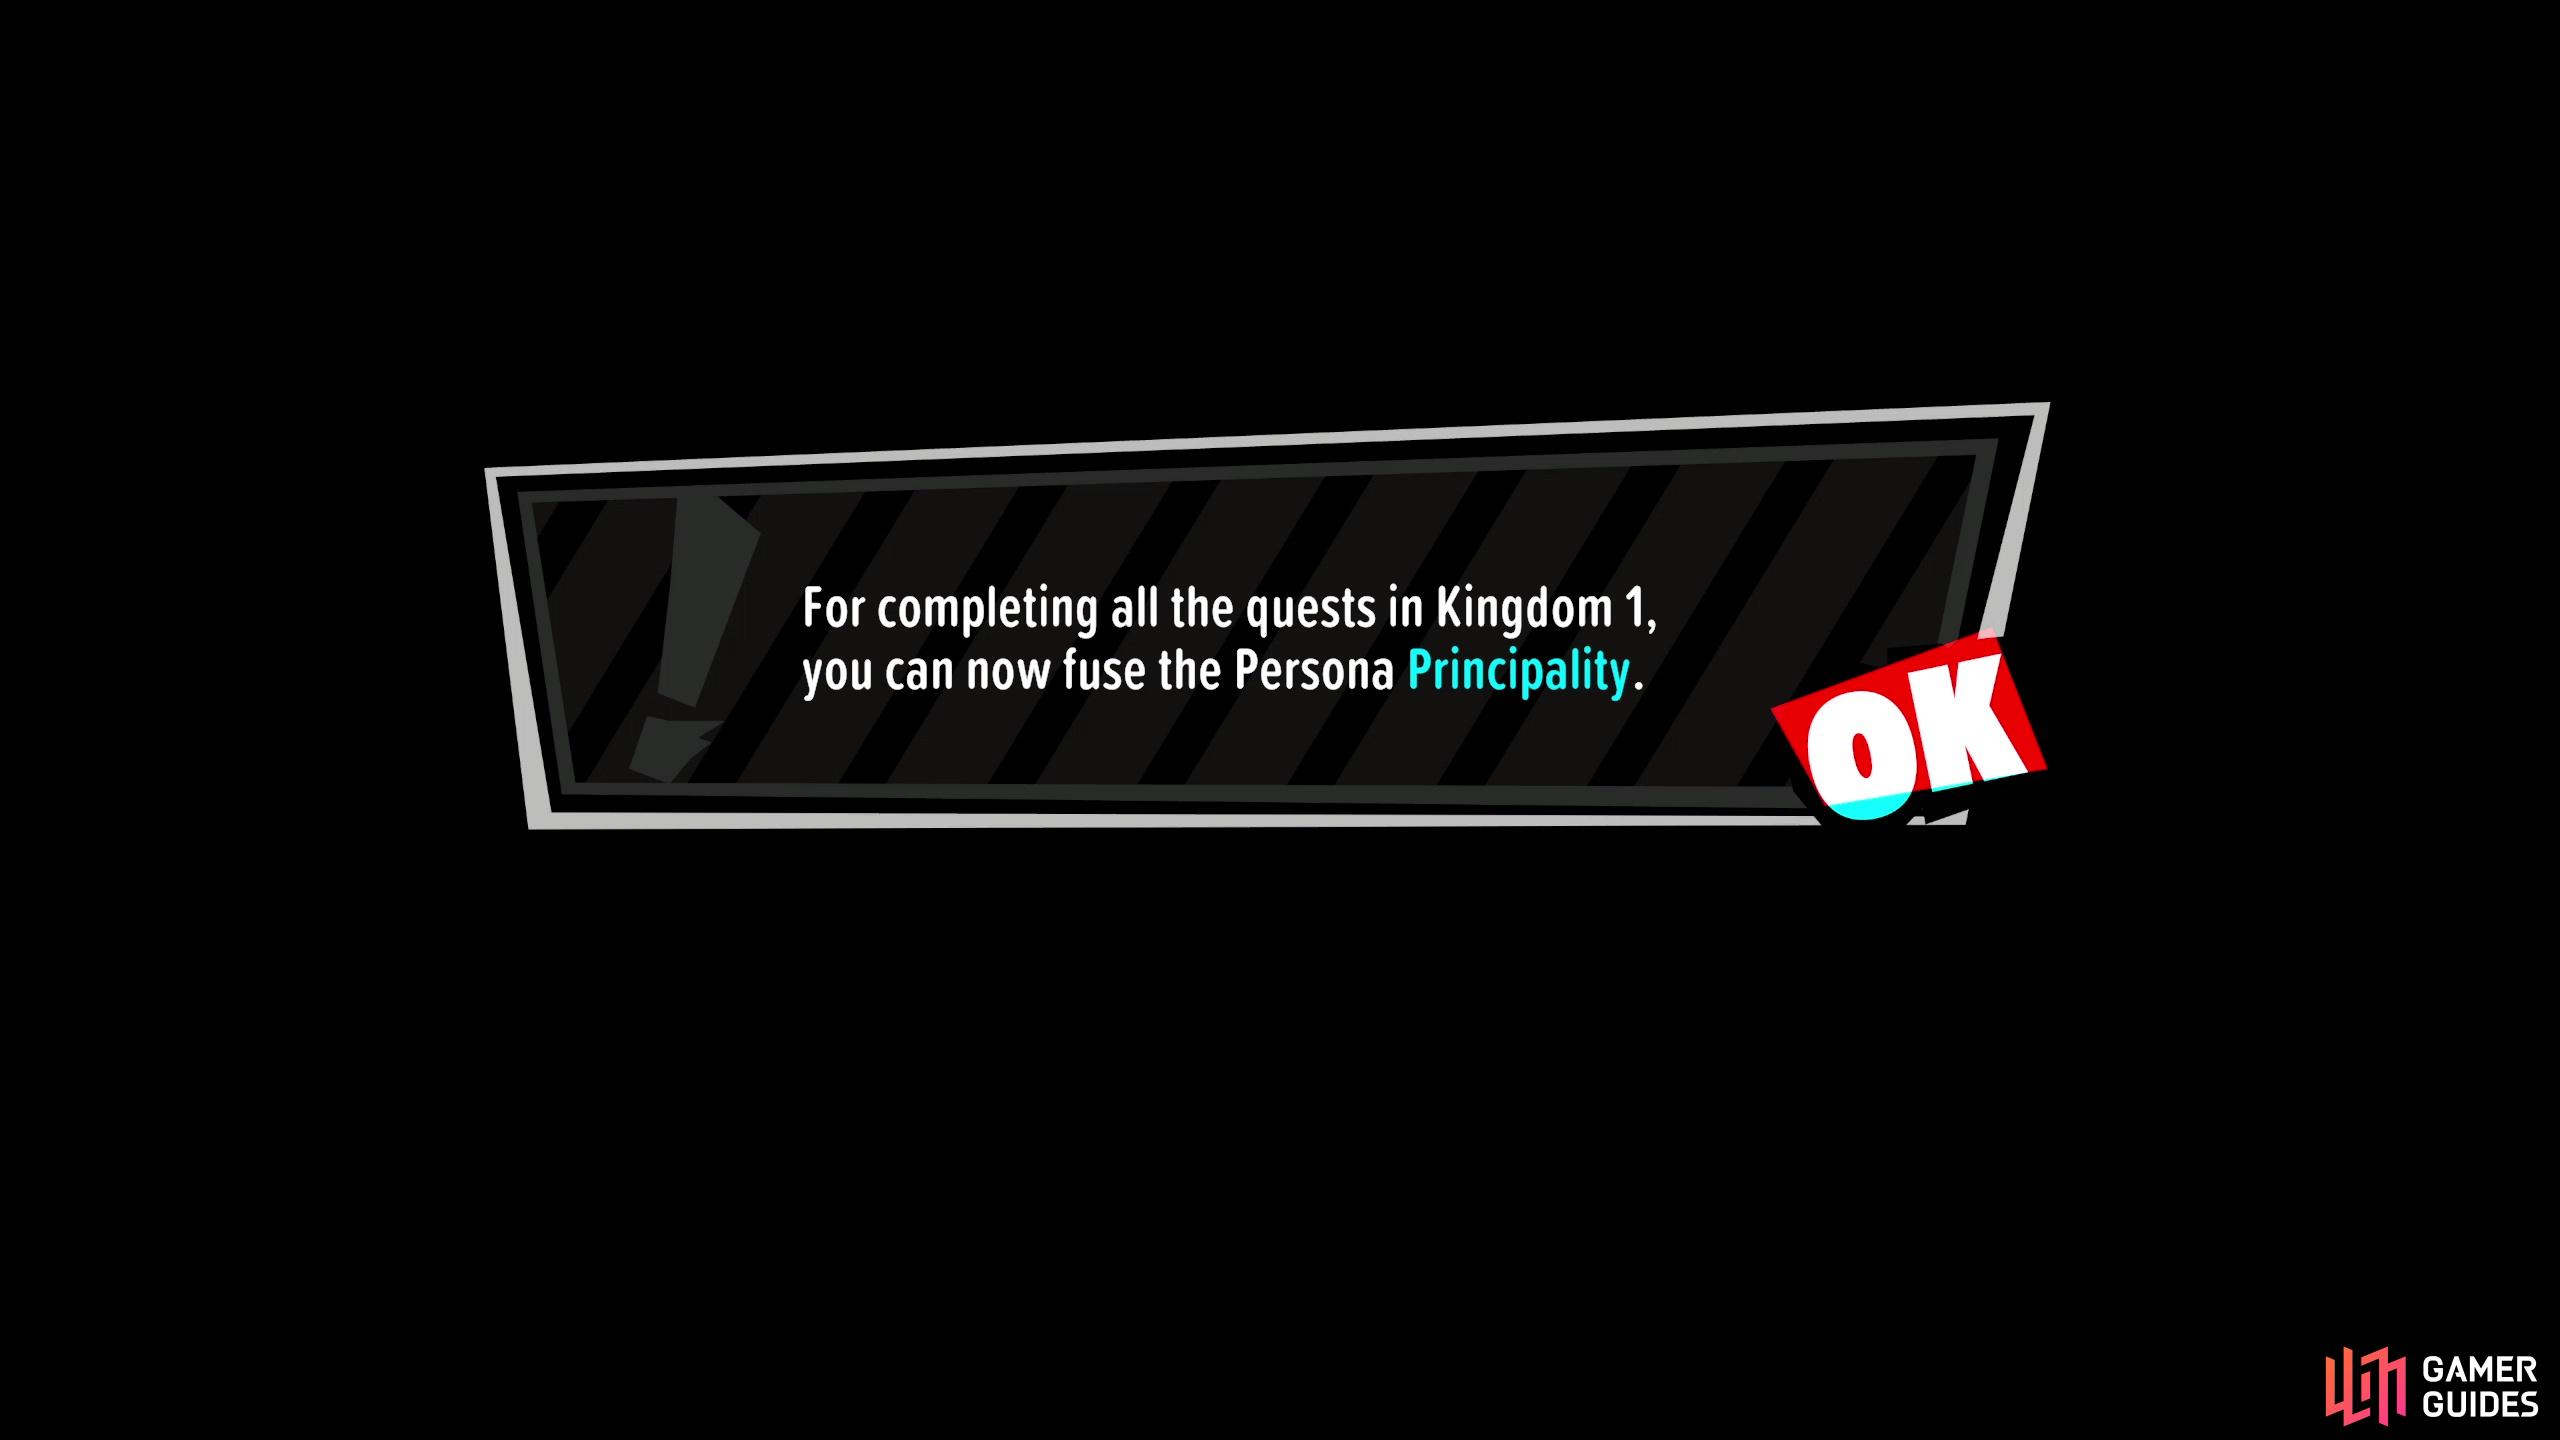 In addition to earning GP for Morgana and Erina, you'll unlock the ability to fuse the Principality persona if you completed all Kingdom 1 quests.